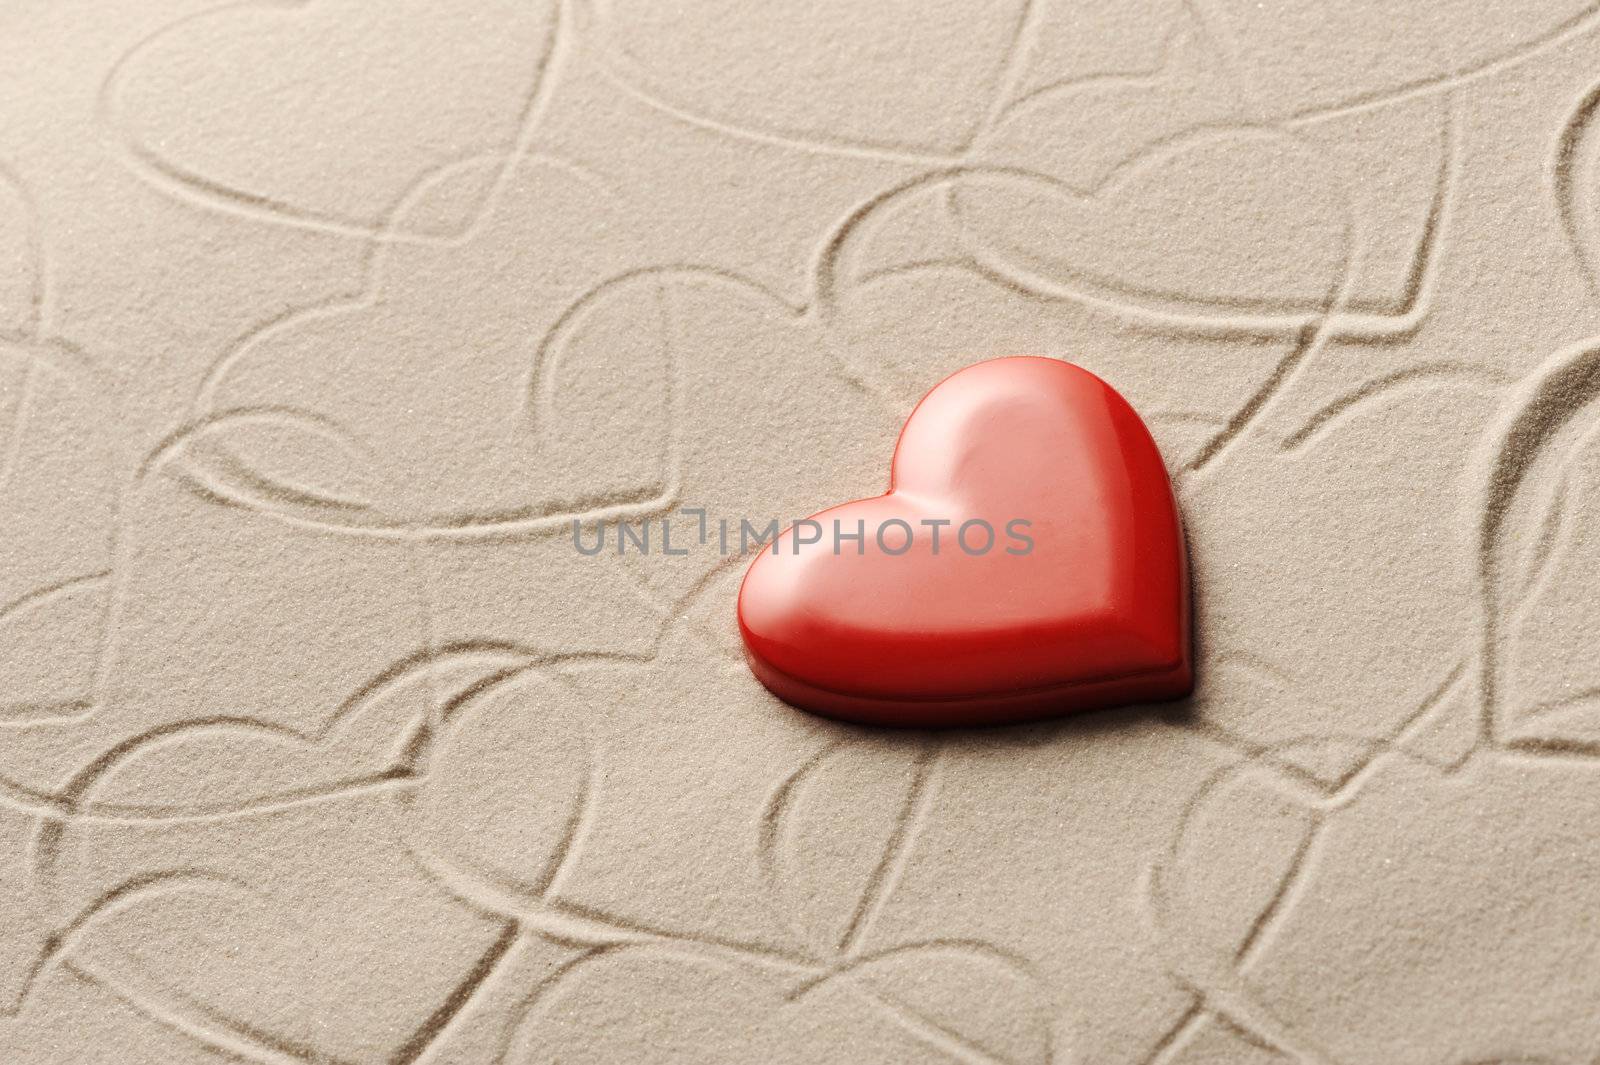 Beach background with hearts drawing